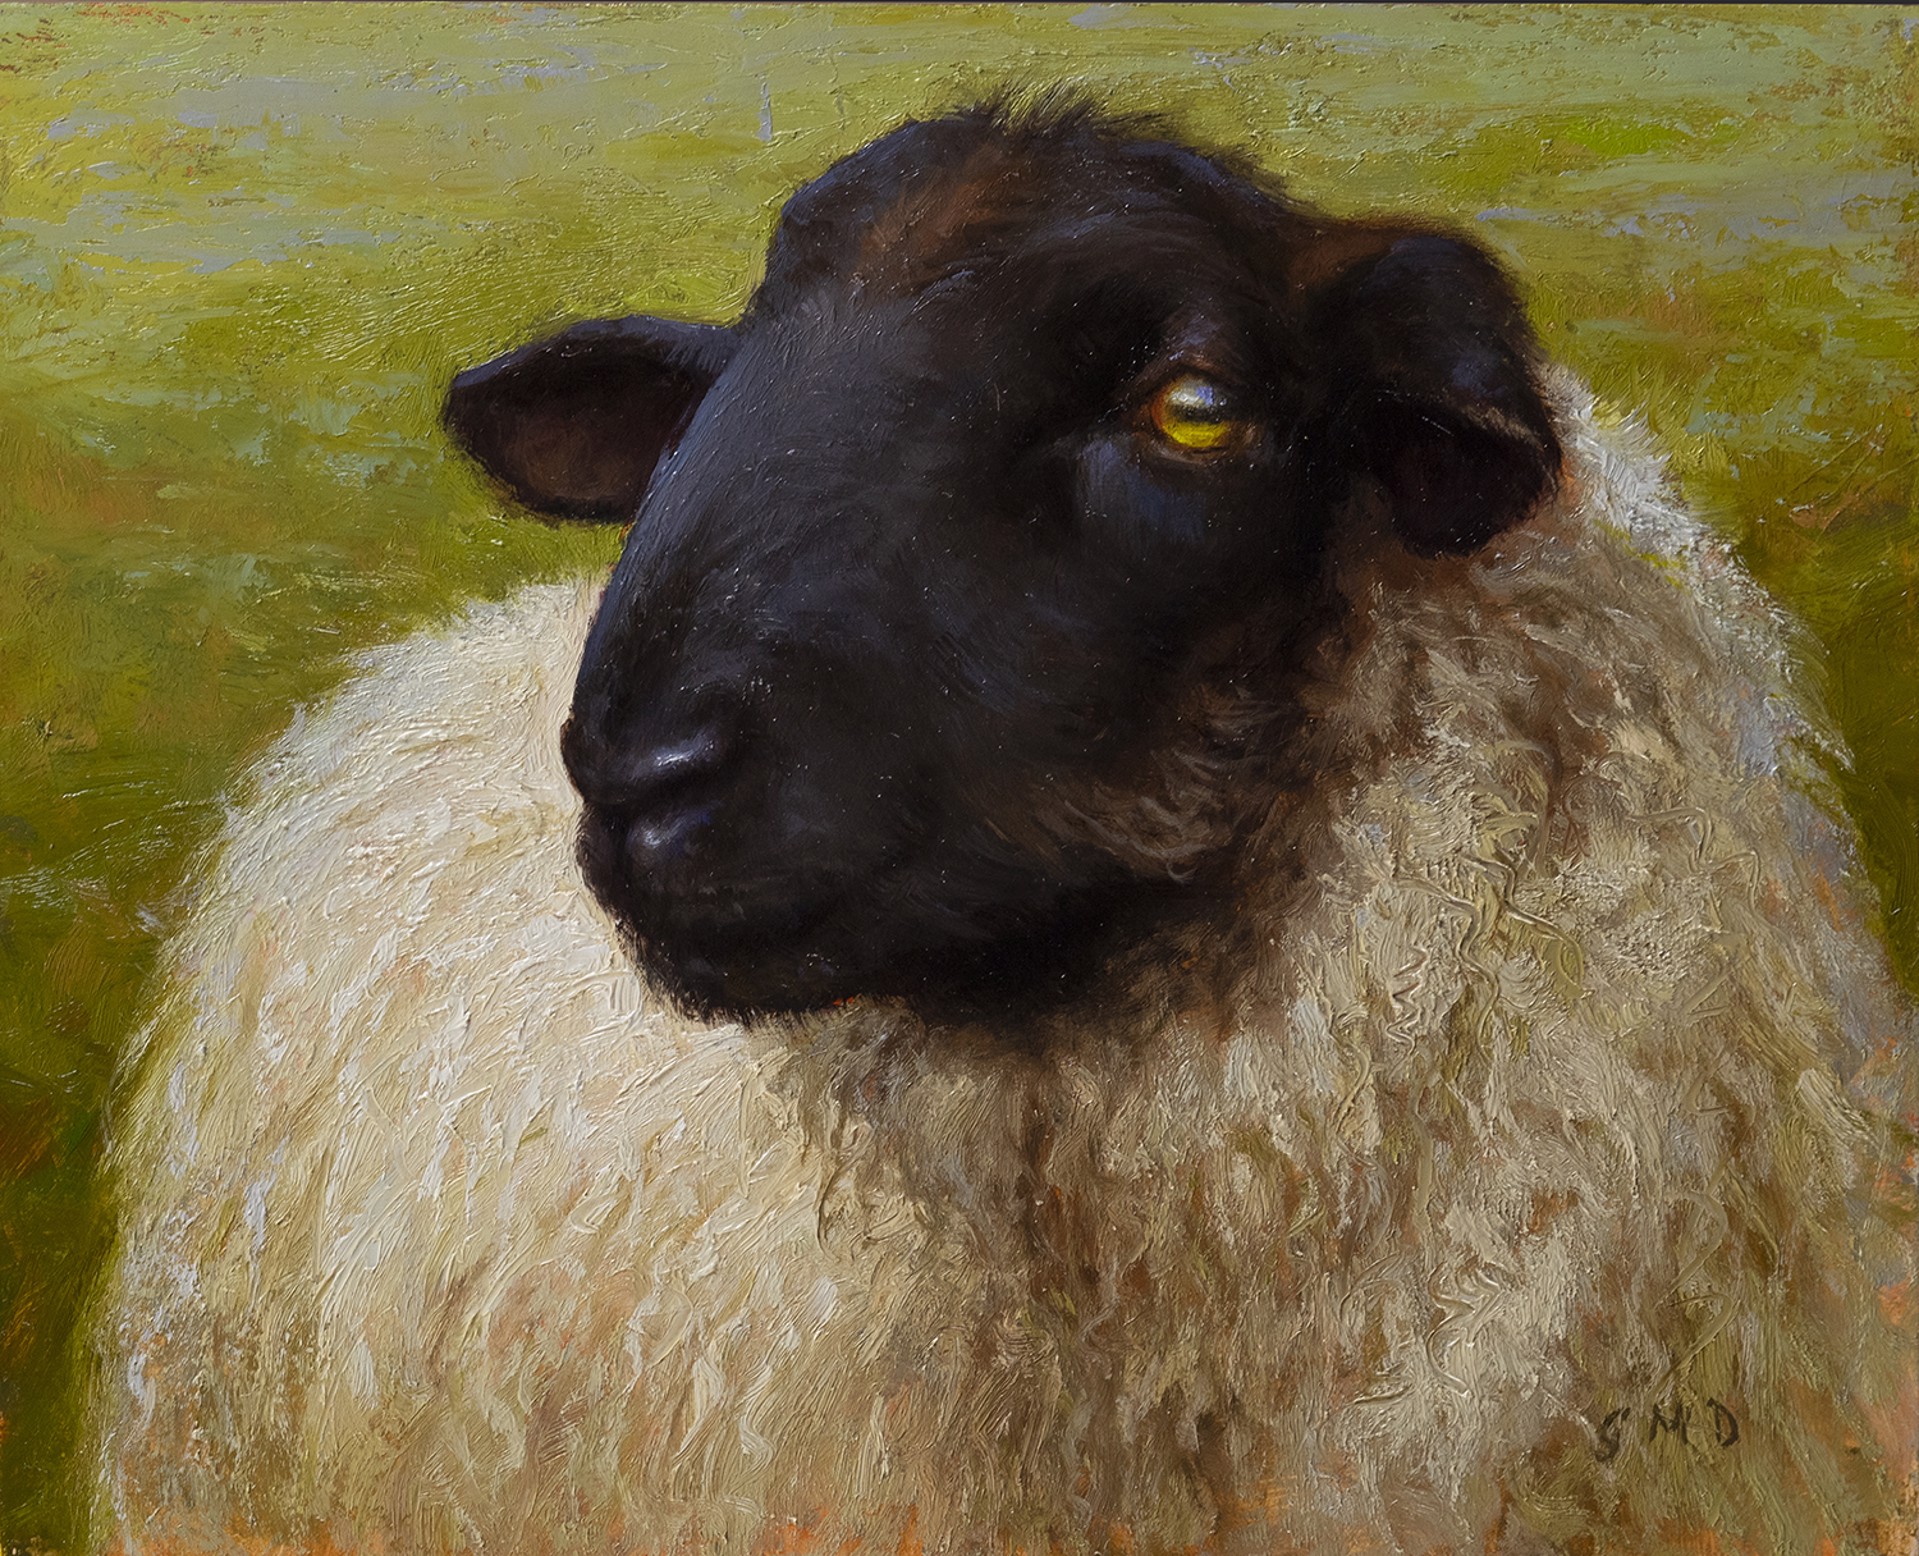 Black Faced Sheep by Grace Devito